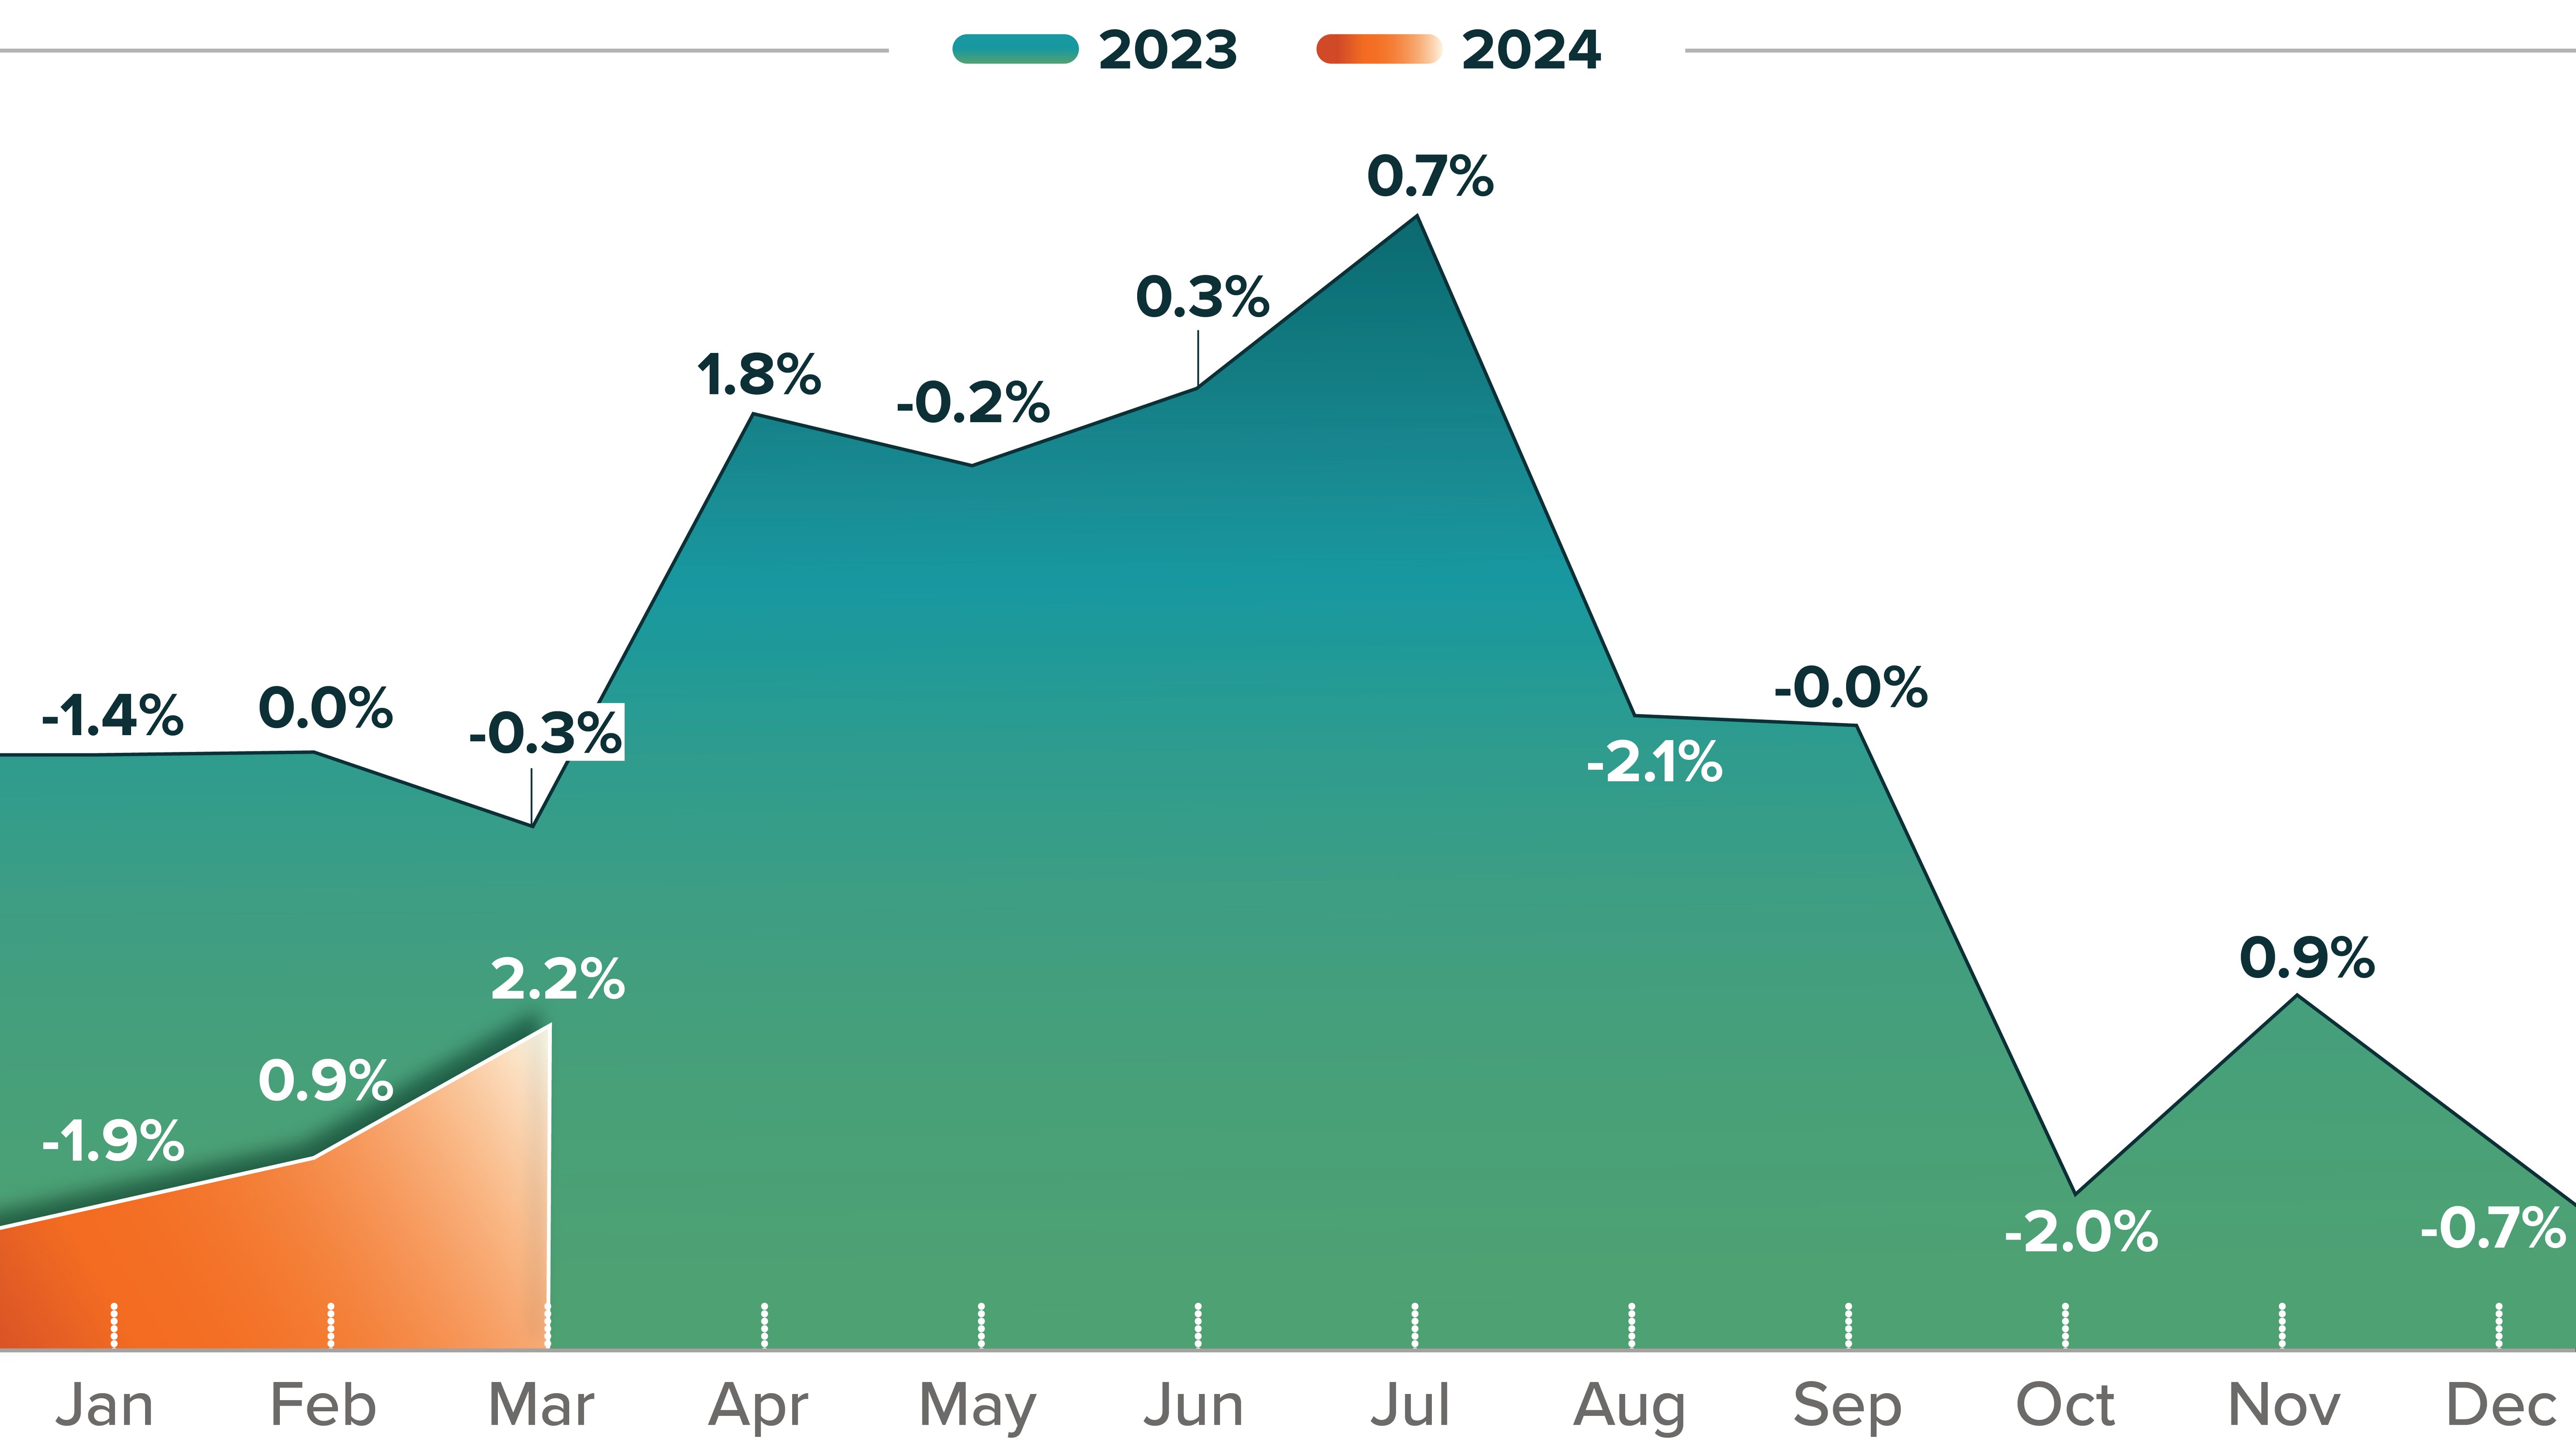 JM&A Group Automotive trends report 2023 year-end F&I PVR 2019 & 2023 chart